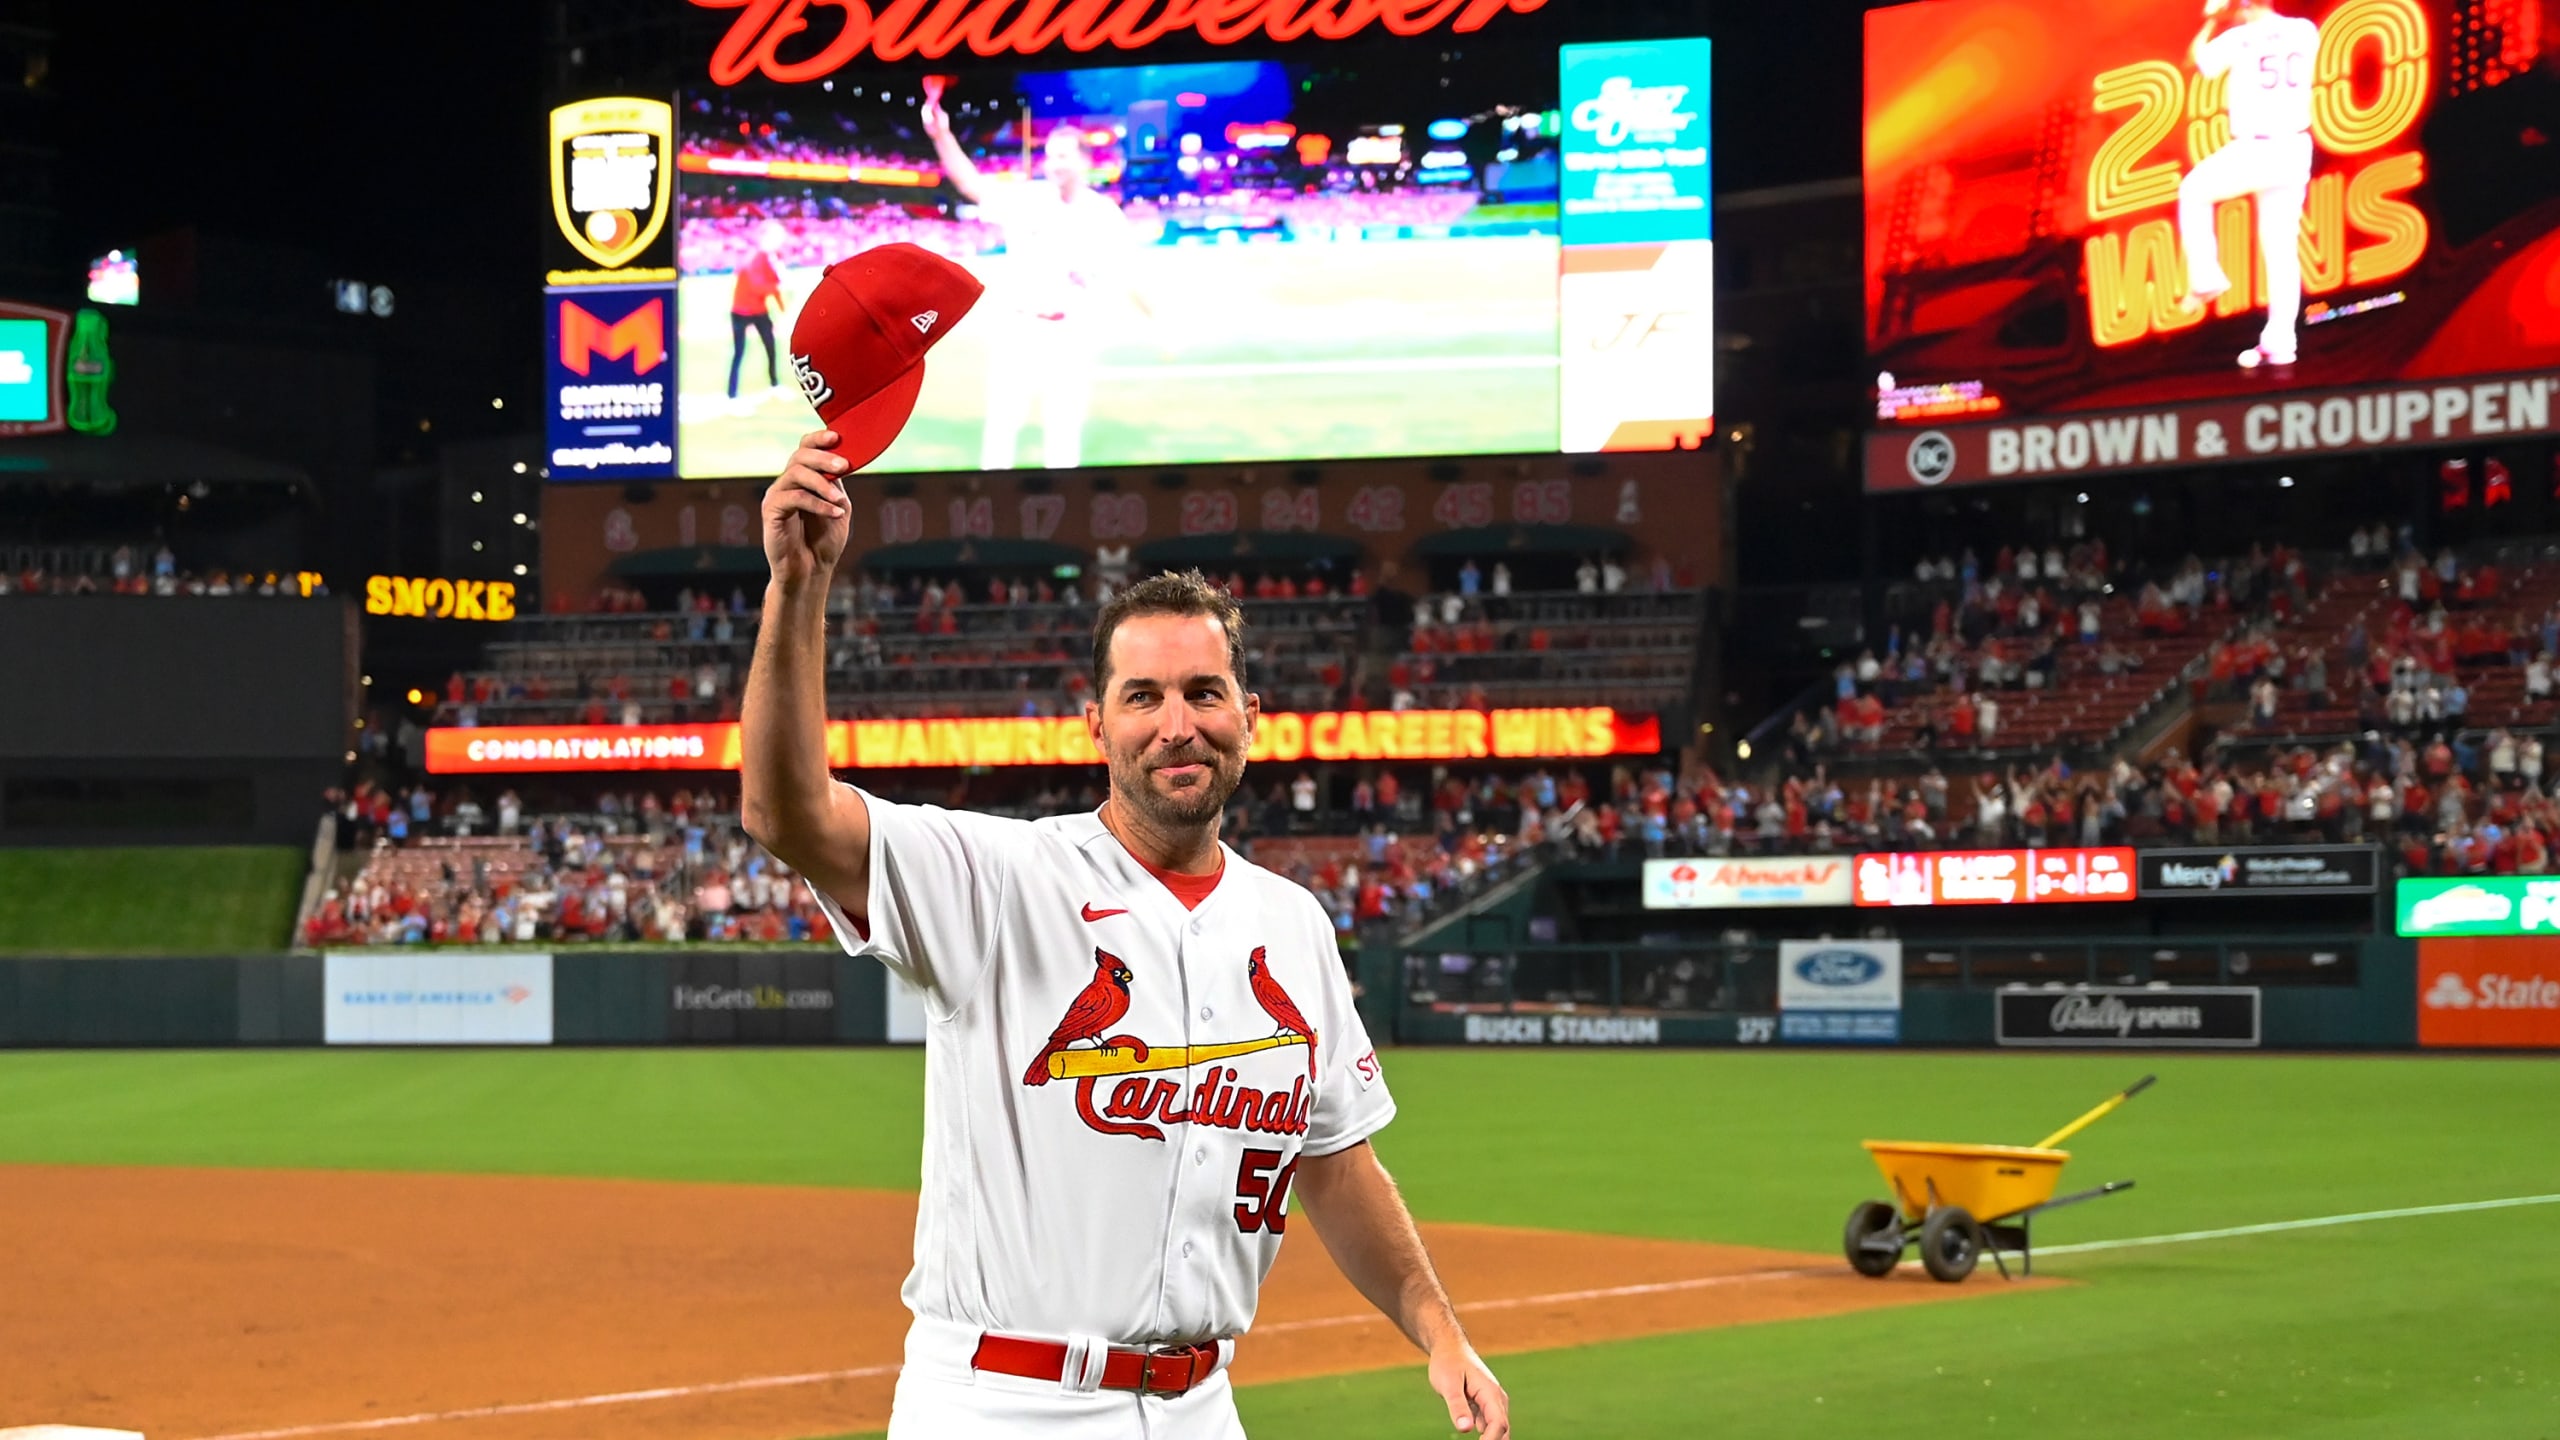 This is what the Cardinals gave Adam Wainwright for retirement